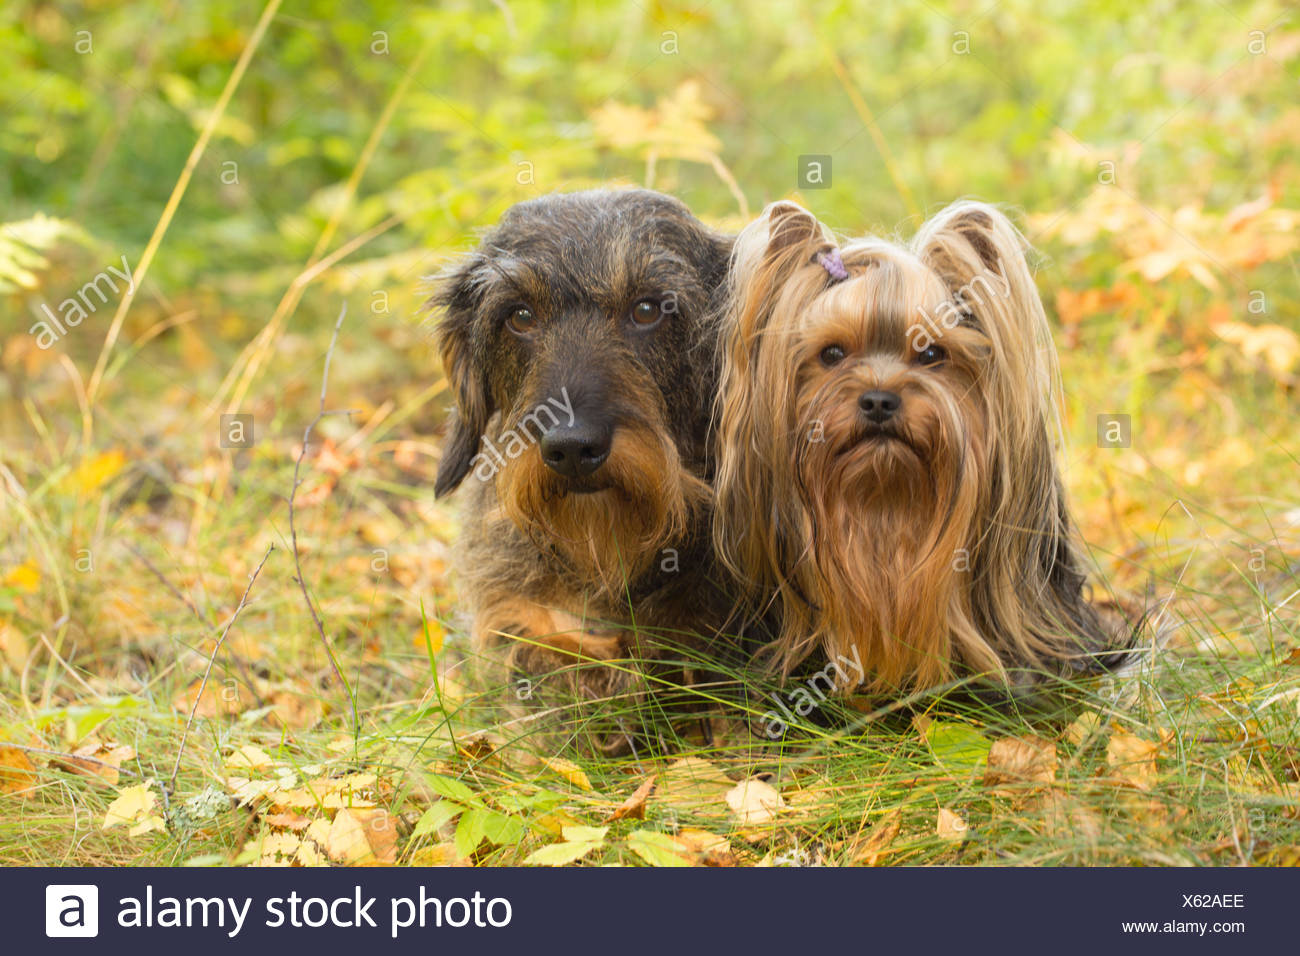 Dog Portrait Of Yorkshire Terrier And Wire Haired Dachshund Stock Photo Alamy